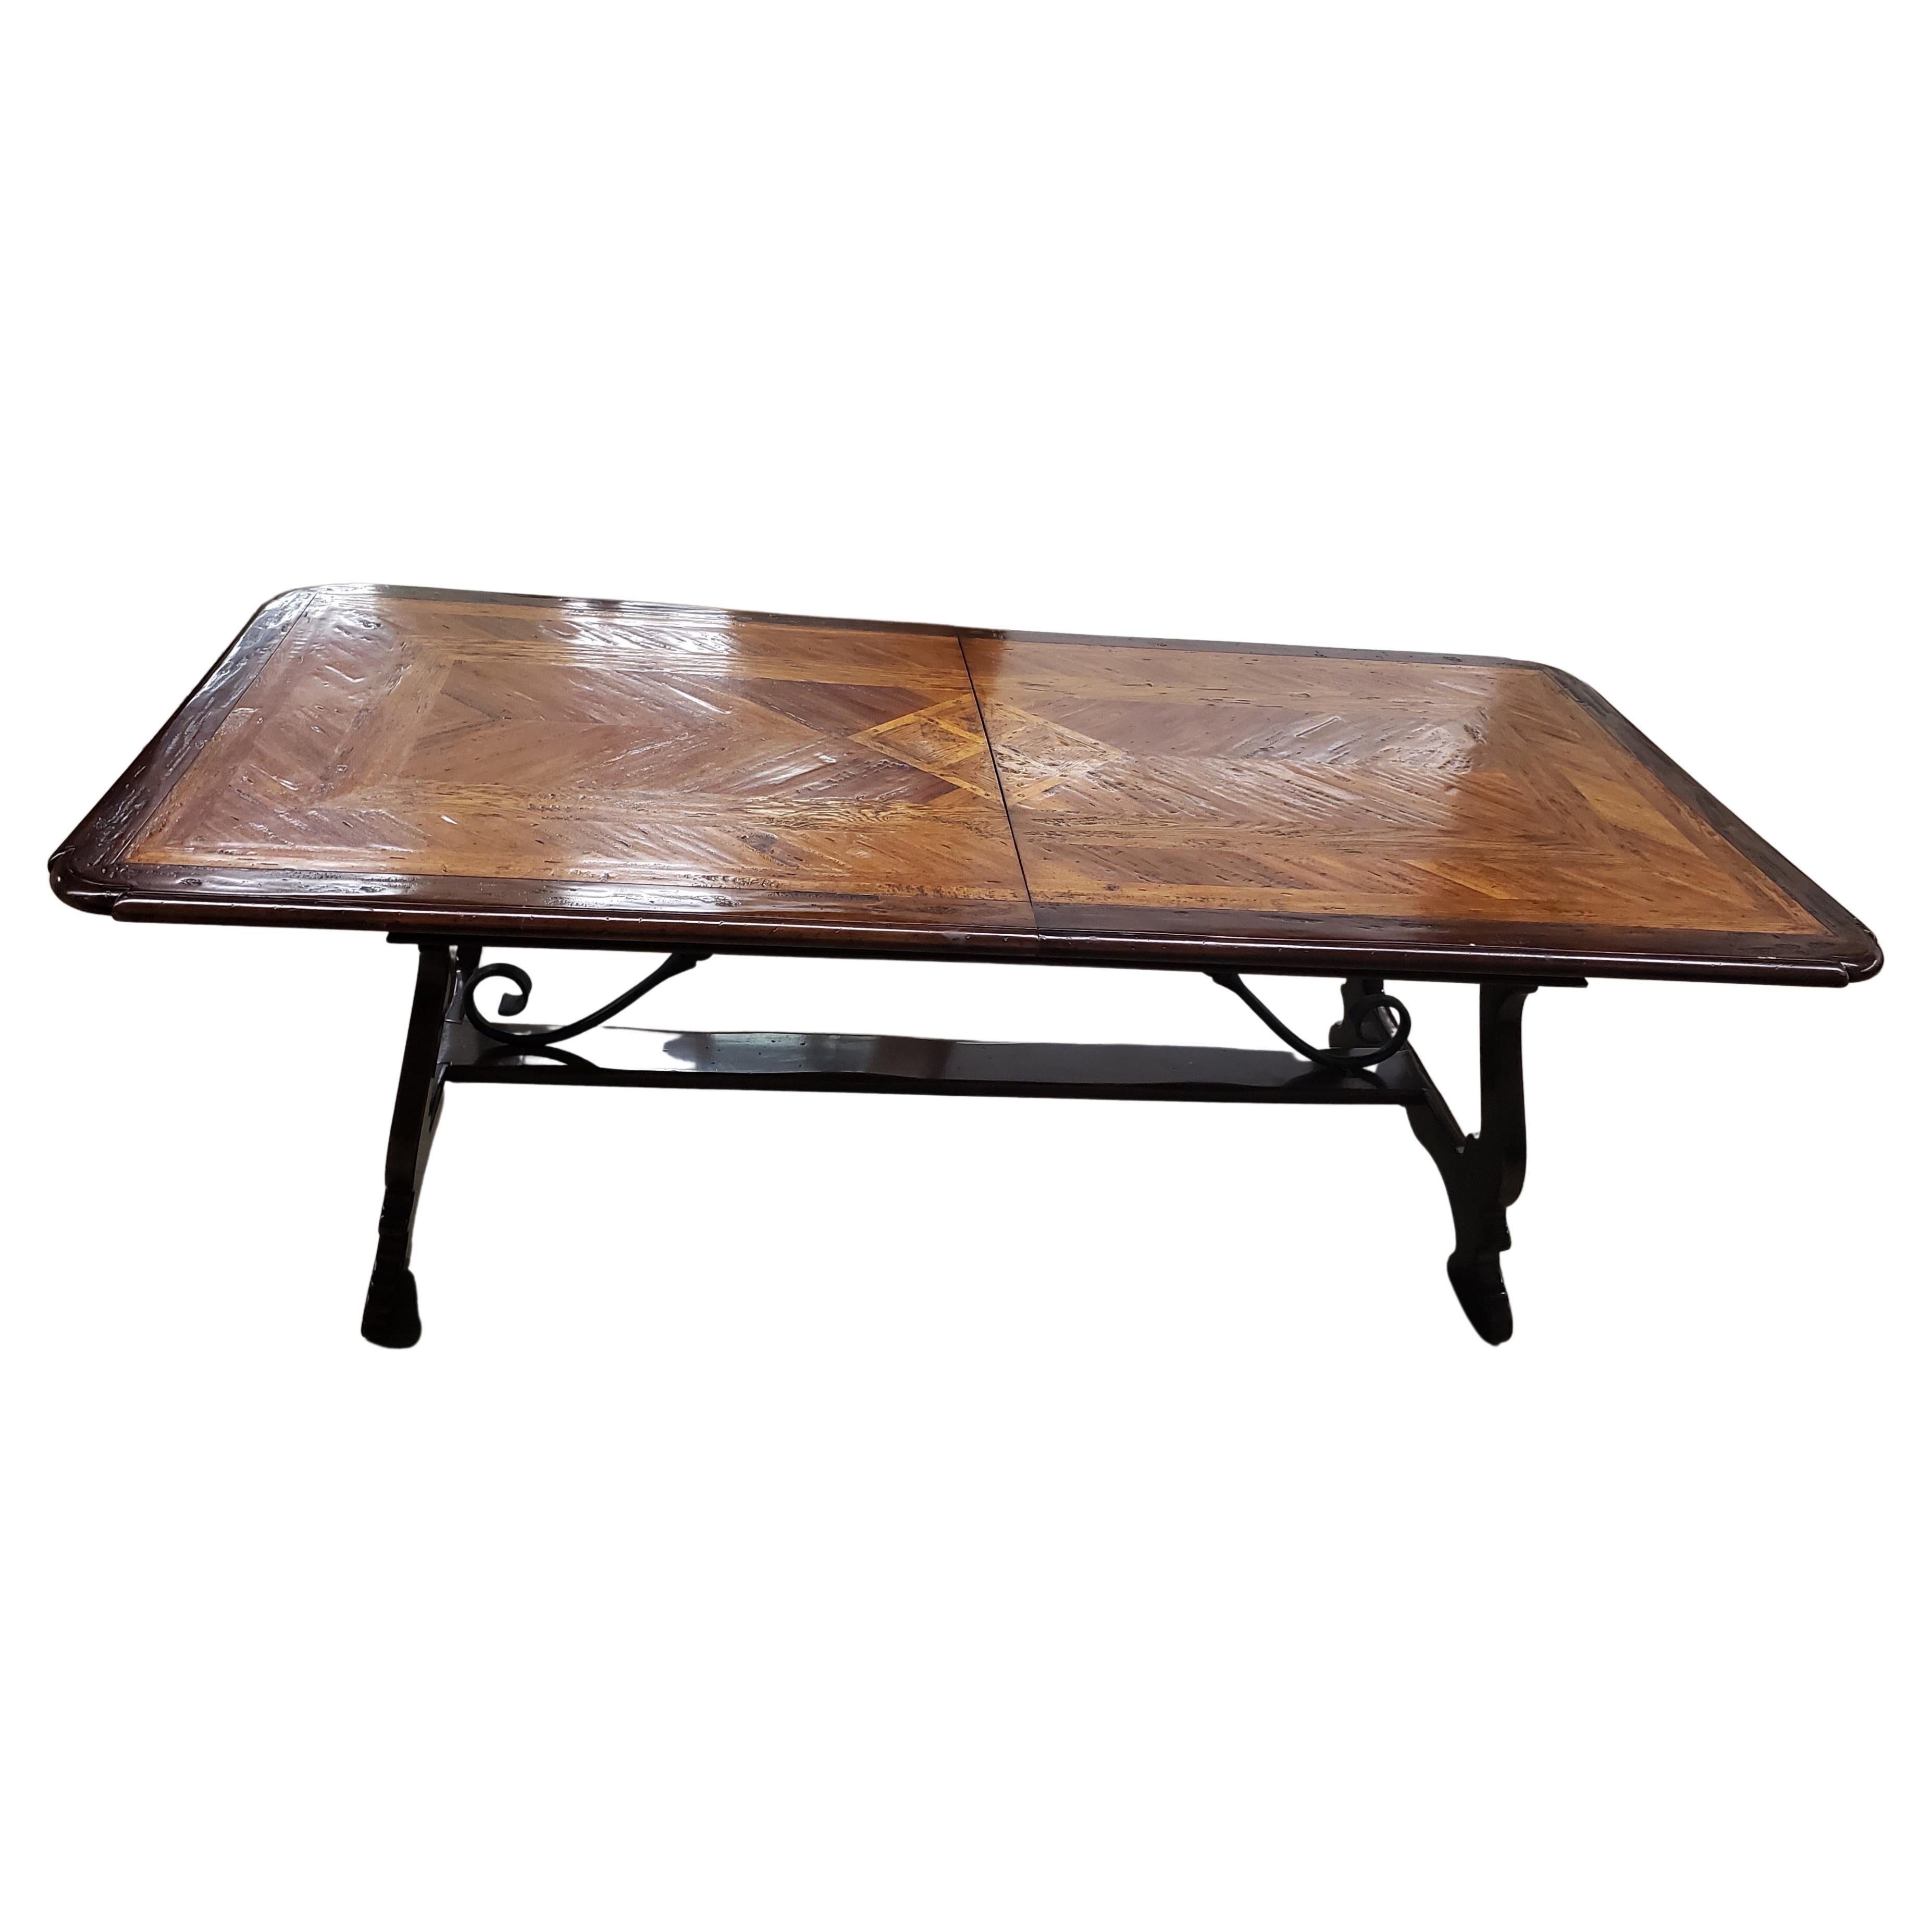 20th Century Dennis & Leen Baroque Style Walnut Oak Mahogany Parquetry Trestle Dining Table  For Sale